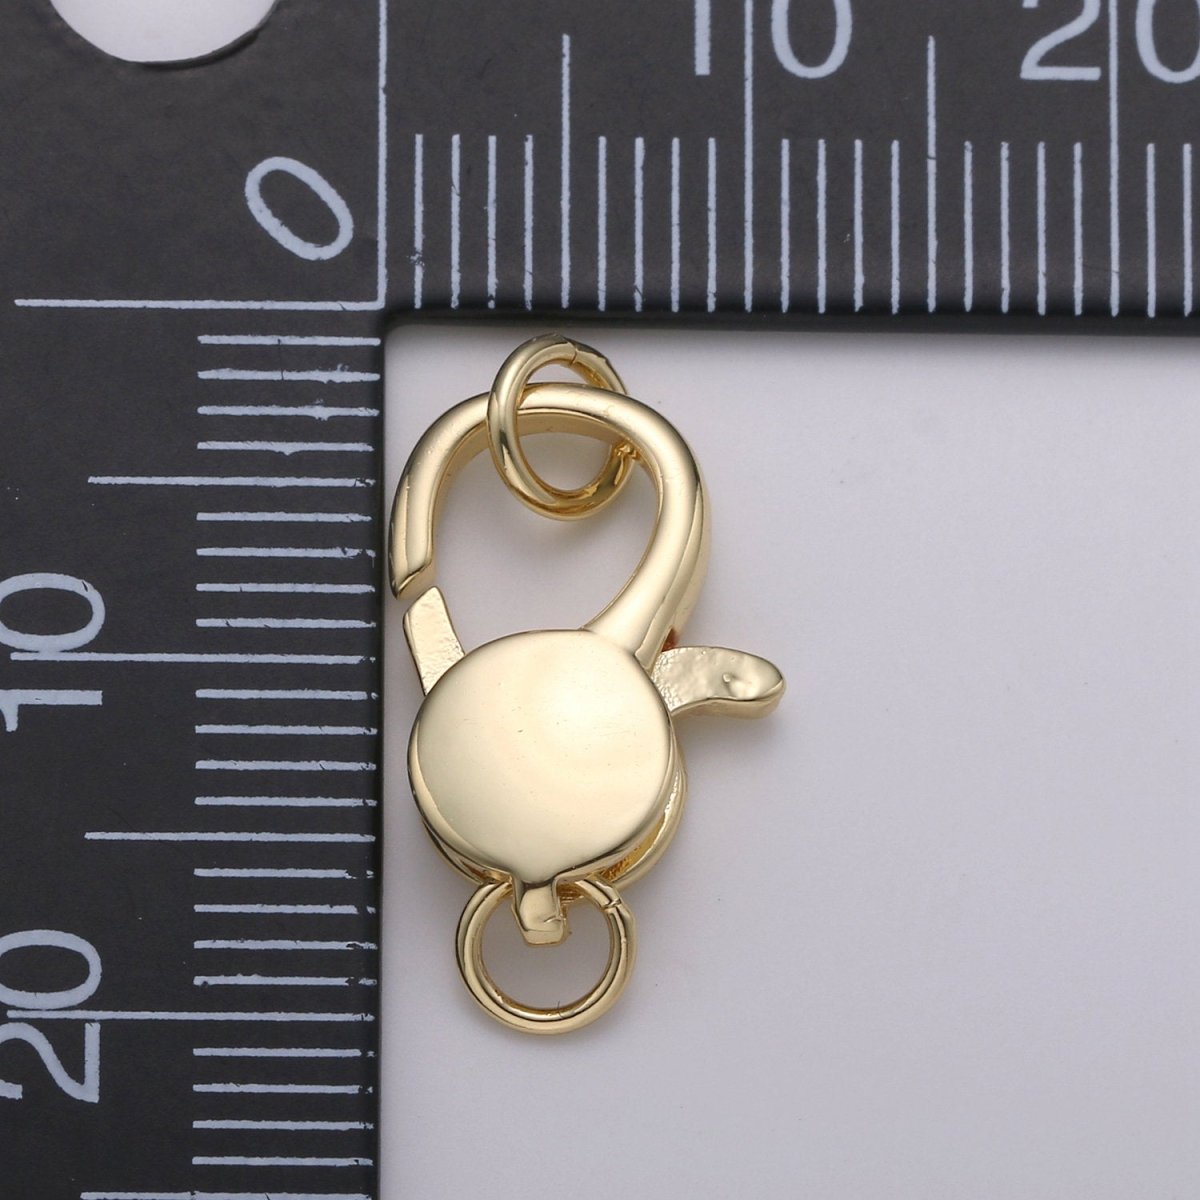 Wholesale Lobster Clasp 14k Gold Filled, Lobster Claw with Jump Ring for Jewelry Necklace Bracelet Anklet Making, Size 20mmx10mm K-837 K-838 - DLUXCA